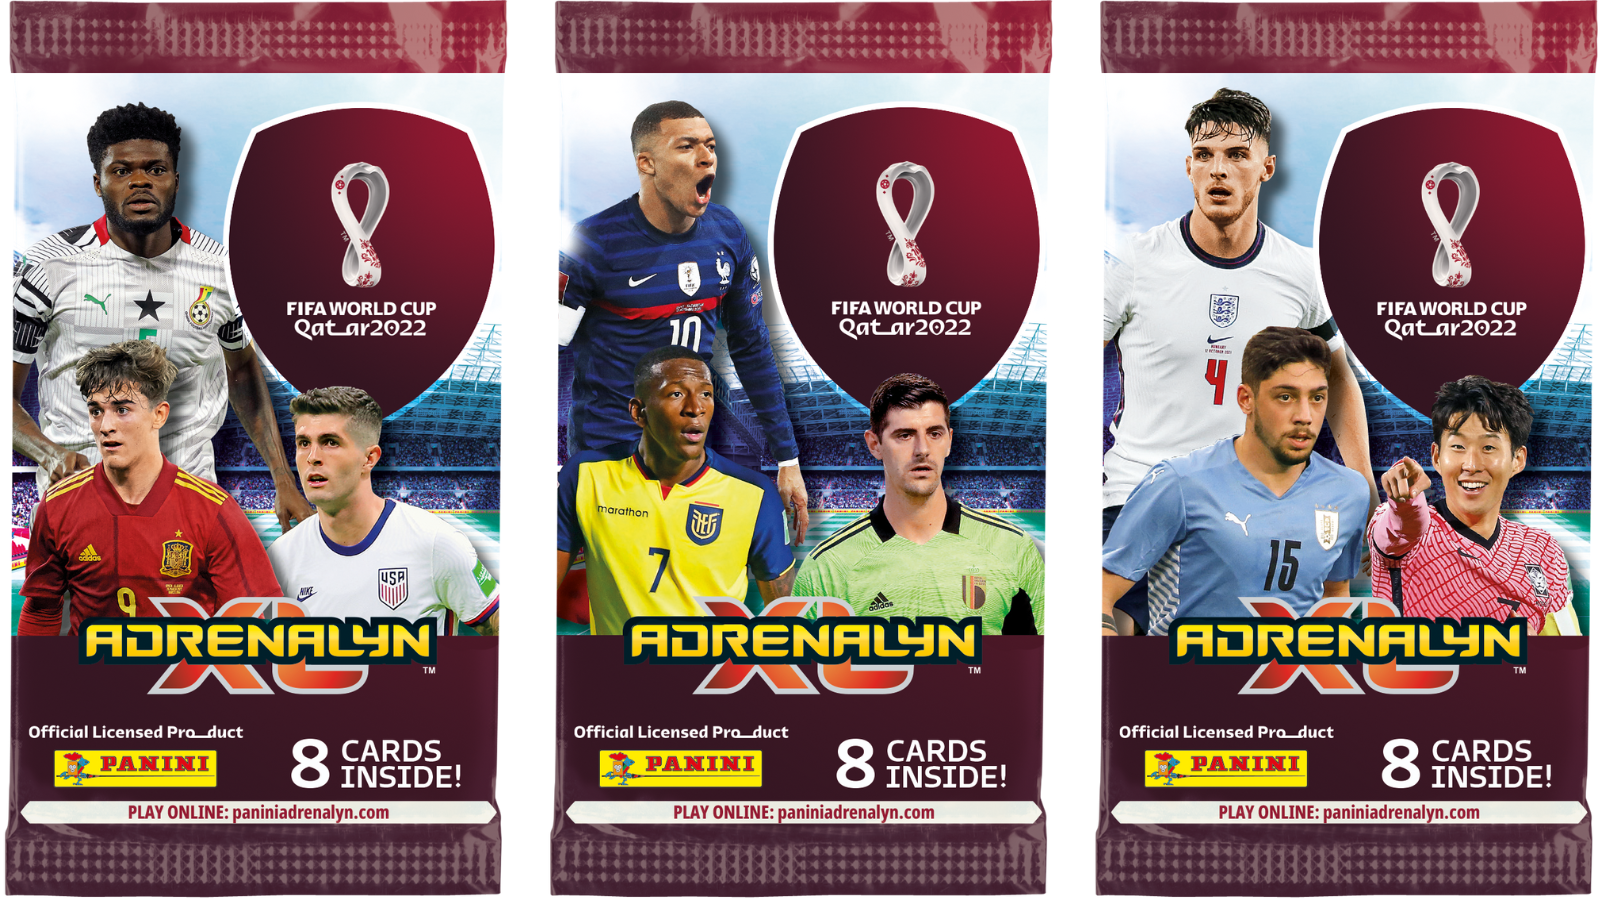 2022 Panini FIFA World Cup Adrenalyn XL Card Collection